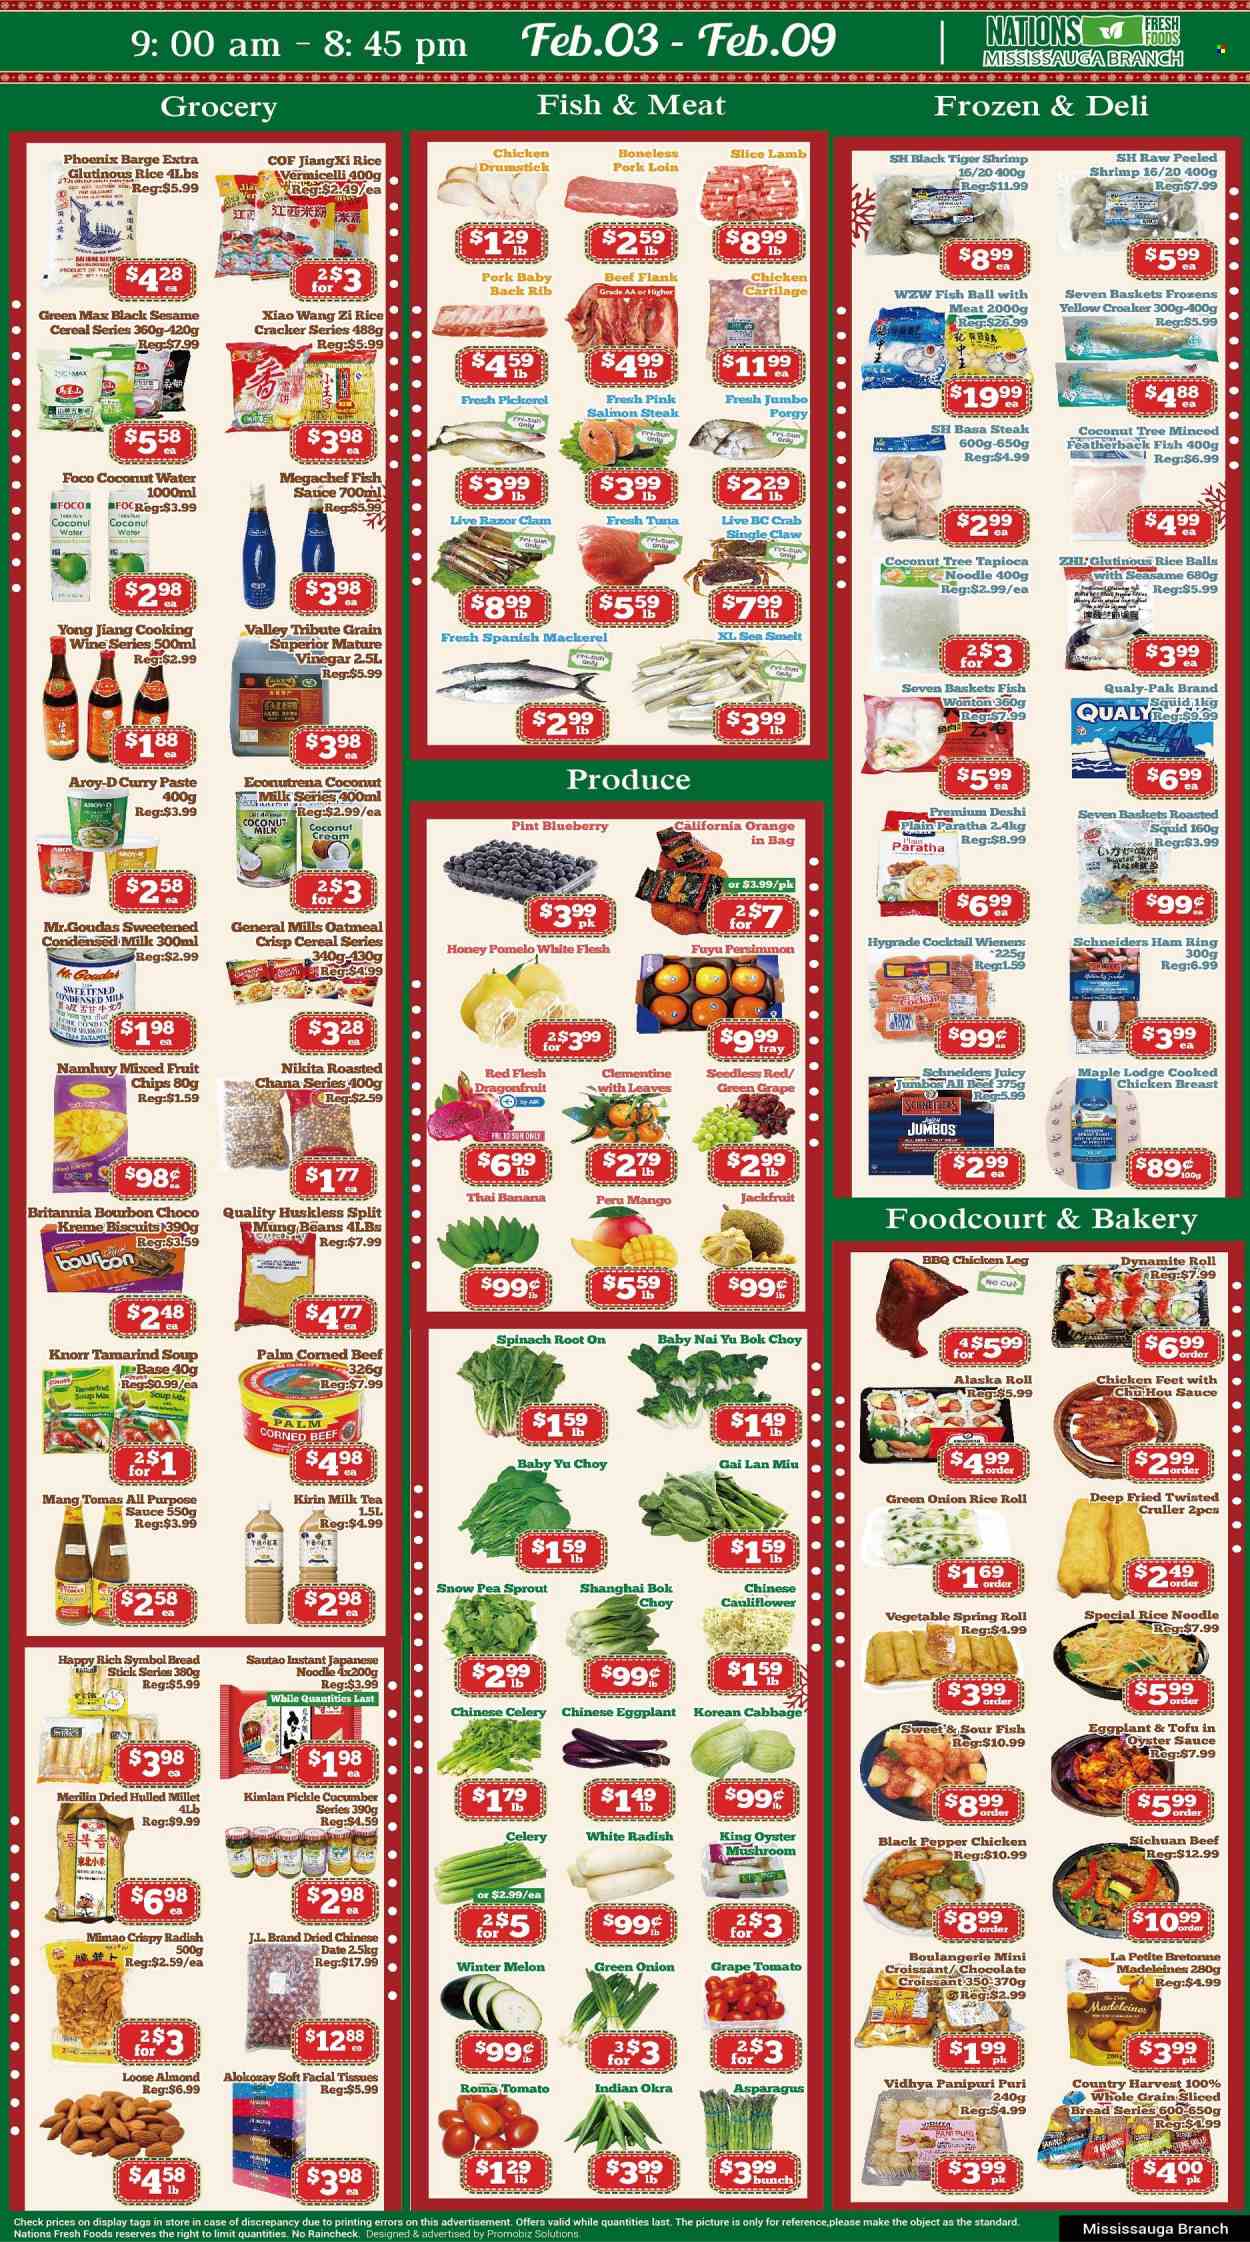 thumbnail - Nations Fresh Foods Flyer - February 03, 2023 - February 09, 2023 - Sales products - oyster mushrooms, mushrooms, bread, croissant, asparagus, beans, bok choy, cabbage, radishes, tomatoes, okra, eggplant, white radish, green onion, mango, persimmons, oranges, melons, pomelo, clams, mackerel, squid, tuna, oysters, crab, walleye, soup mix, soup, sauce, noodles, ham, corned beef, tofu, condensed milk, Country Harvest, rice balls, chocolate, crackers, biscuit, rice crackers, oatmeal, tamarind, coconut milk, cereals, rice vermicelli, black pepper, curry paste, fish sauce, oyster sauce, honey, tea, cooking wine, bourbon, chicken breasts, chicken legs, chicken paws, chicken, beef meat, pork loin, pork meat, pork ribs, pork back ribs, tissues, facial tissues, body lotion, steak, Knorr. Page 1.